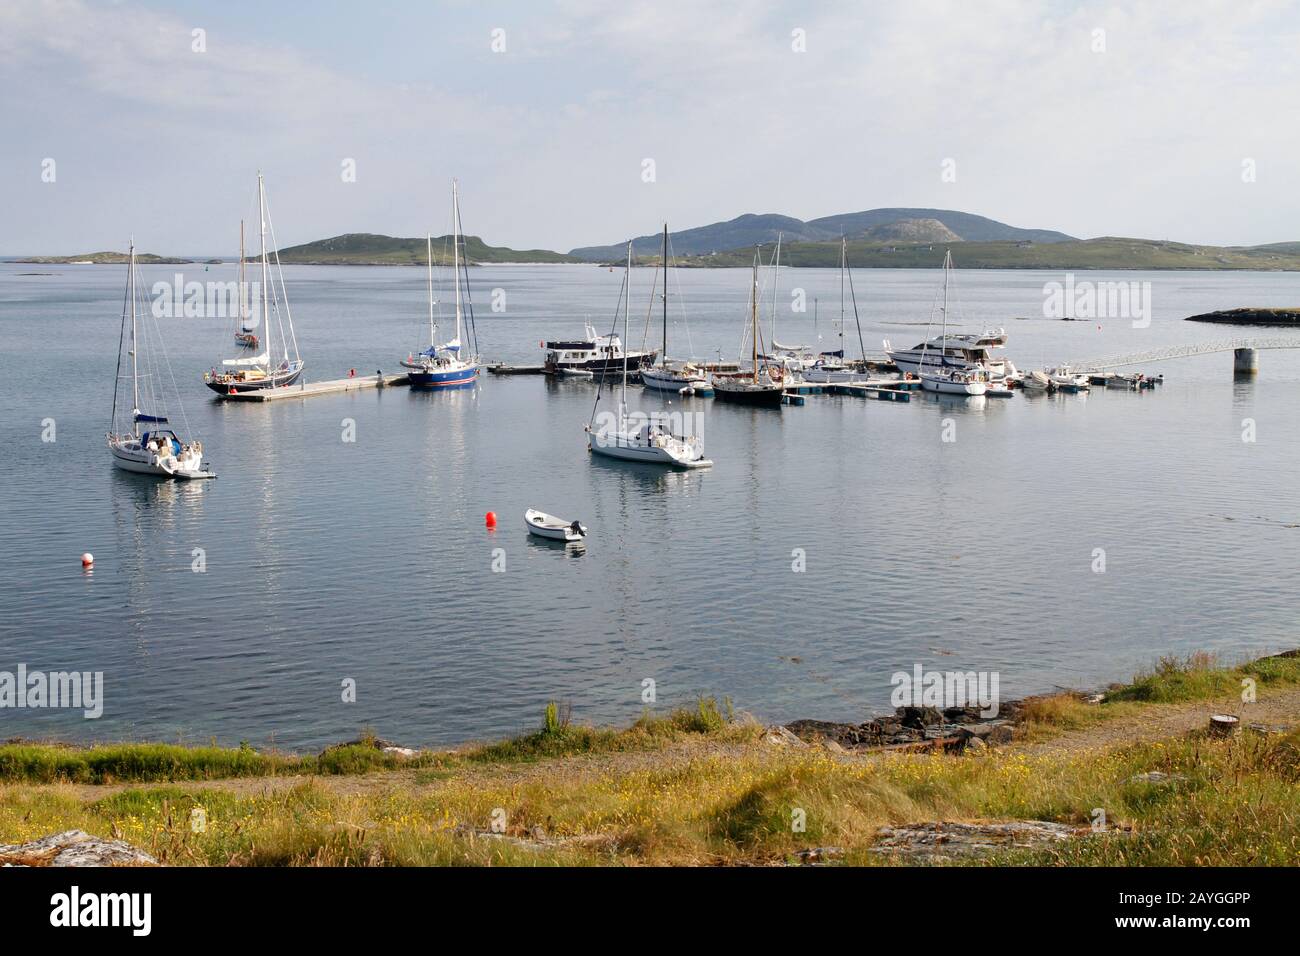 Yachts in the new marina and on the remaining 2 visitors' moorings in Castlebay, Barra, Western Isles Stock Photo